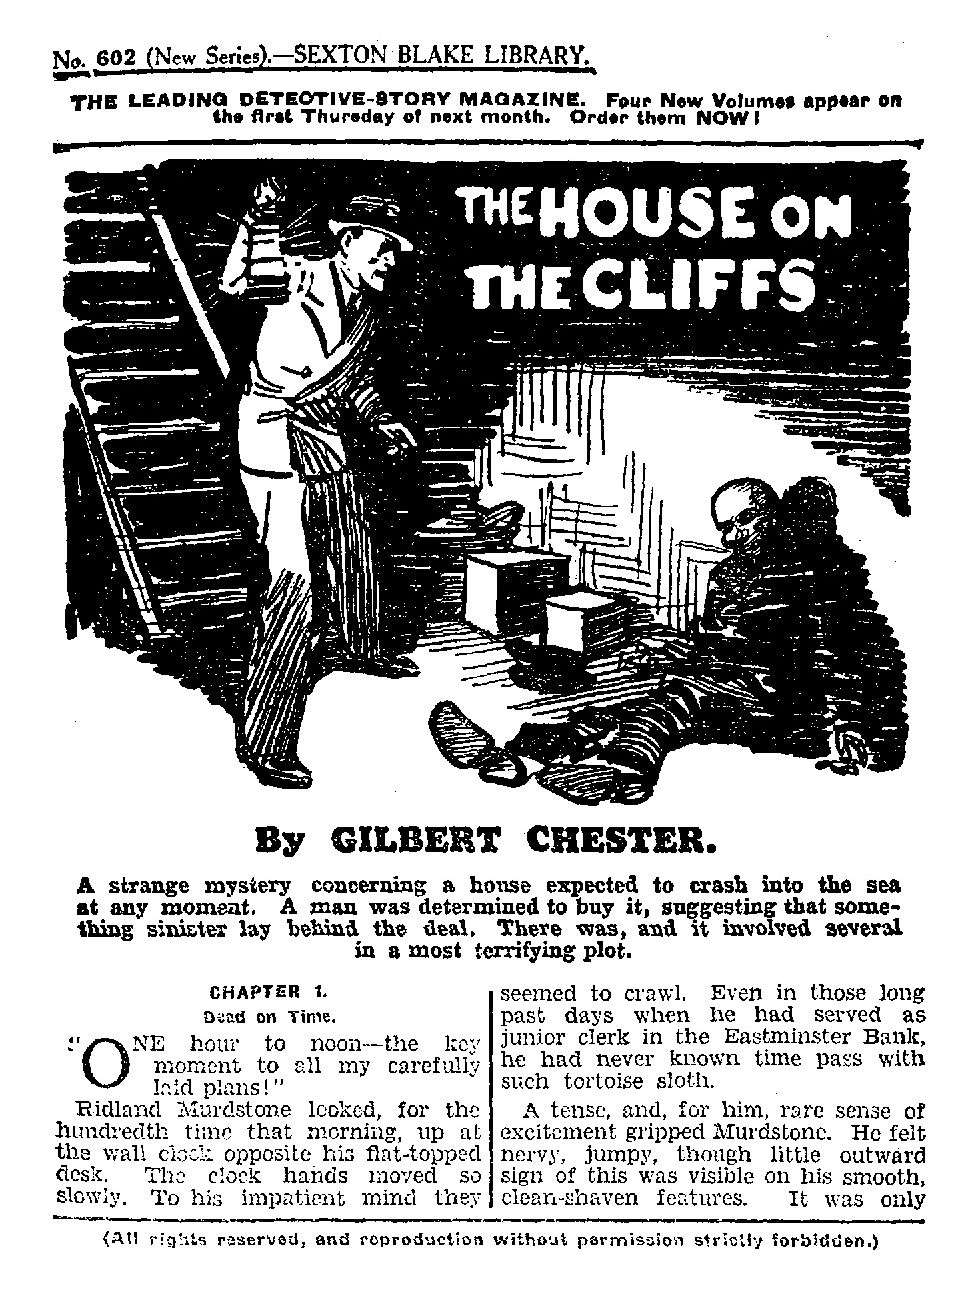 Comic Book Cover For Sexton Blake Library S2 602 - The House On the Cliffs